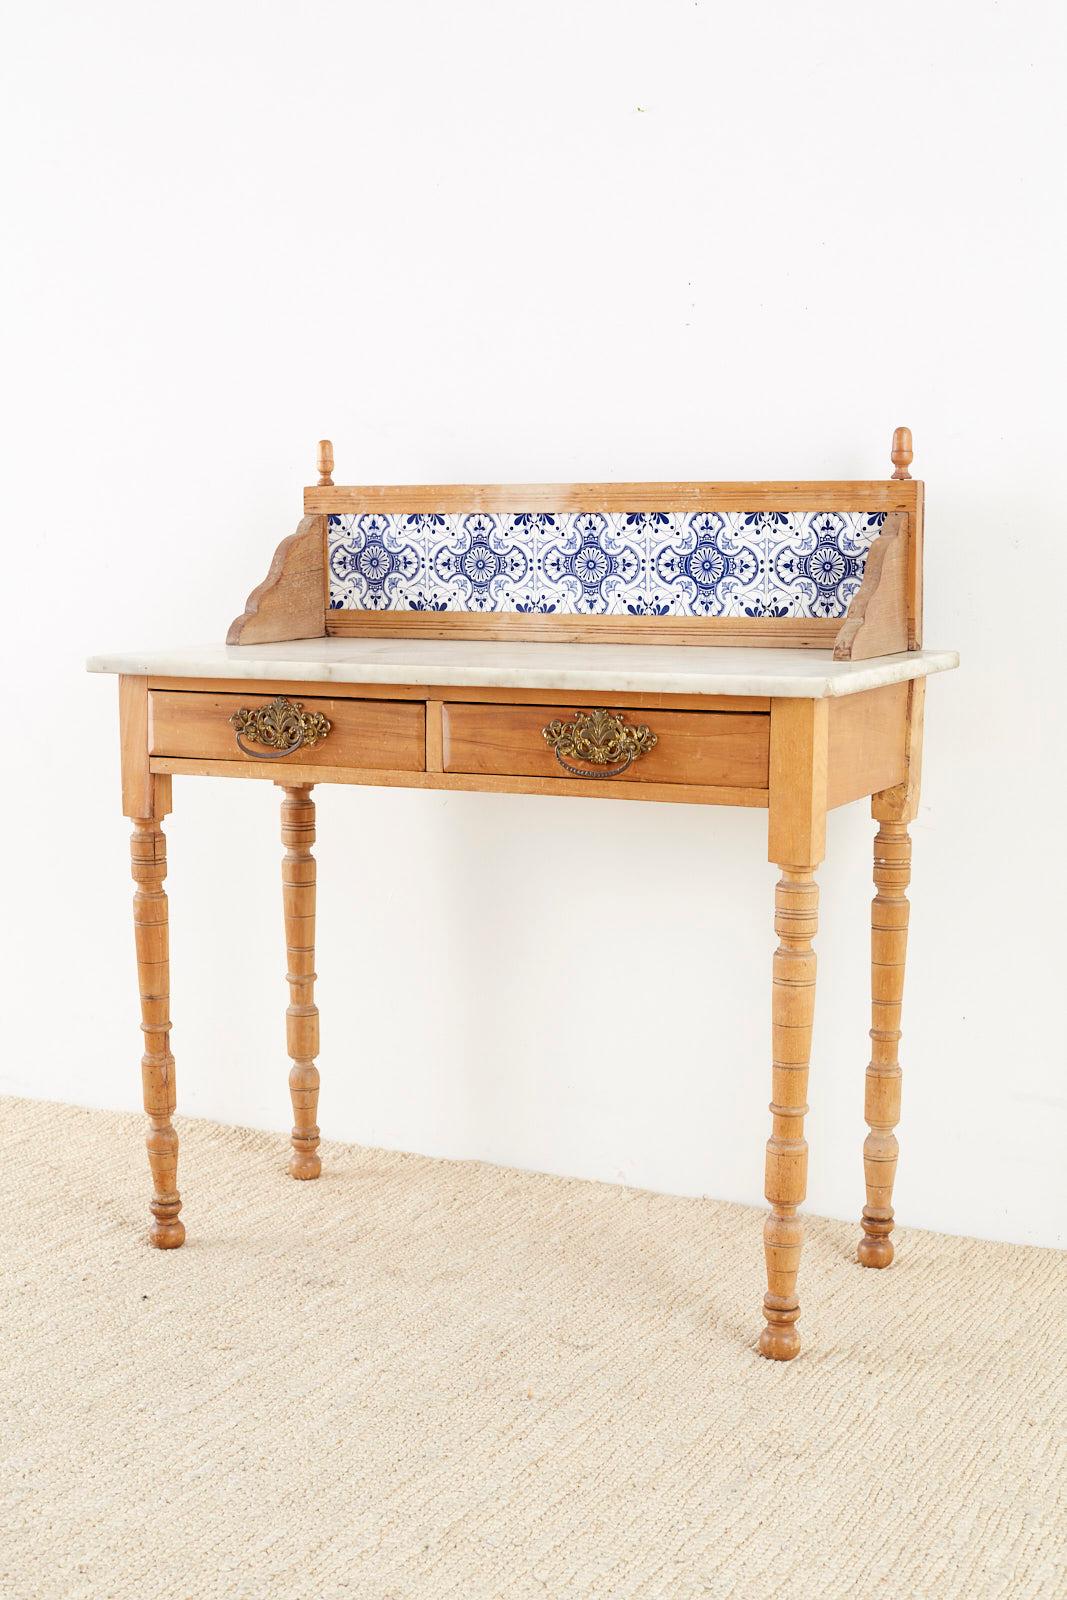 Rustic Country Pine Marble-Top Table with Blue and White Tiles